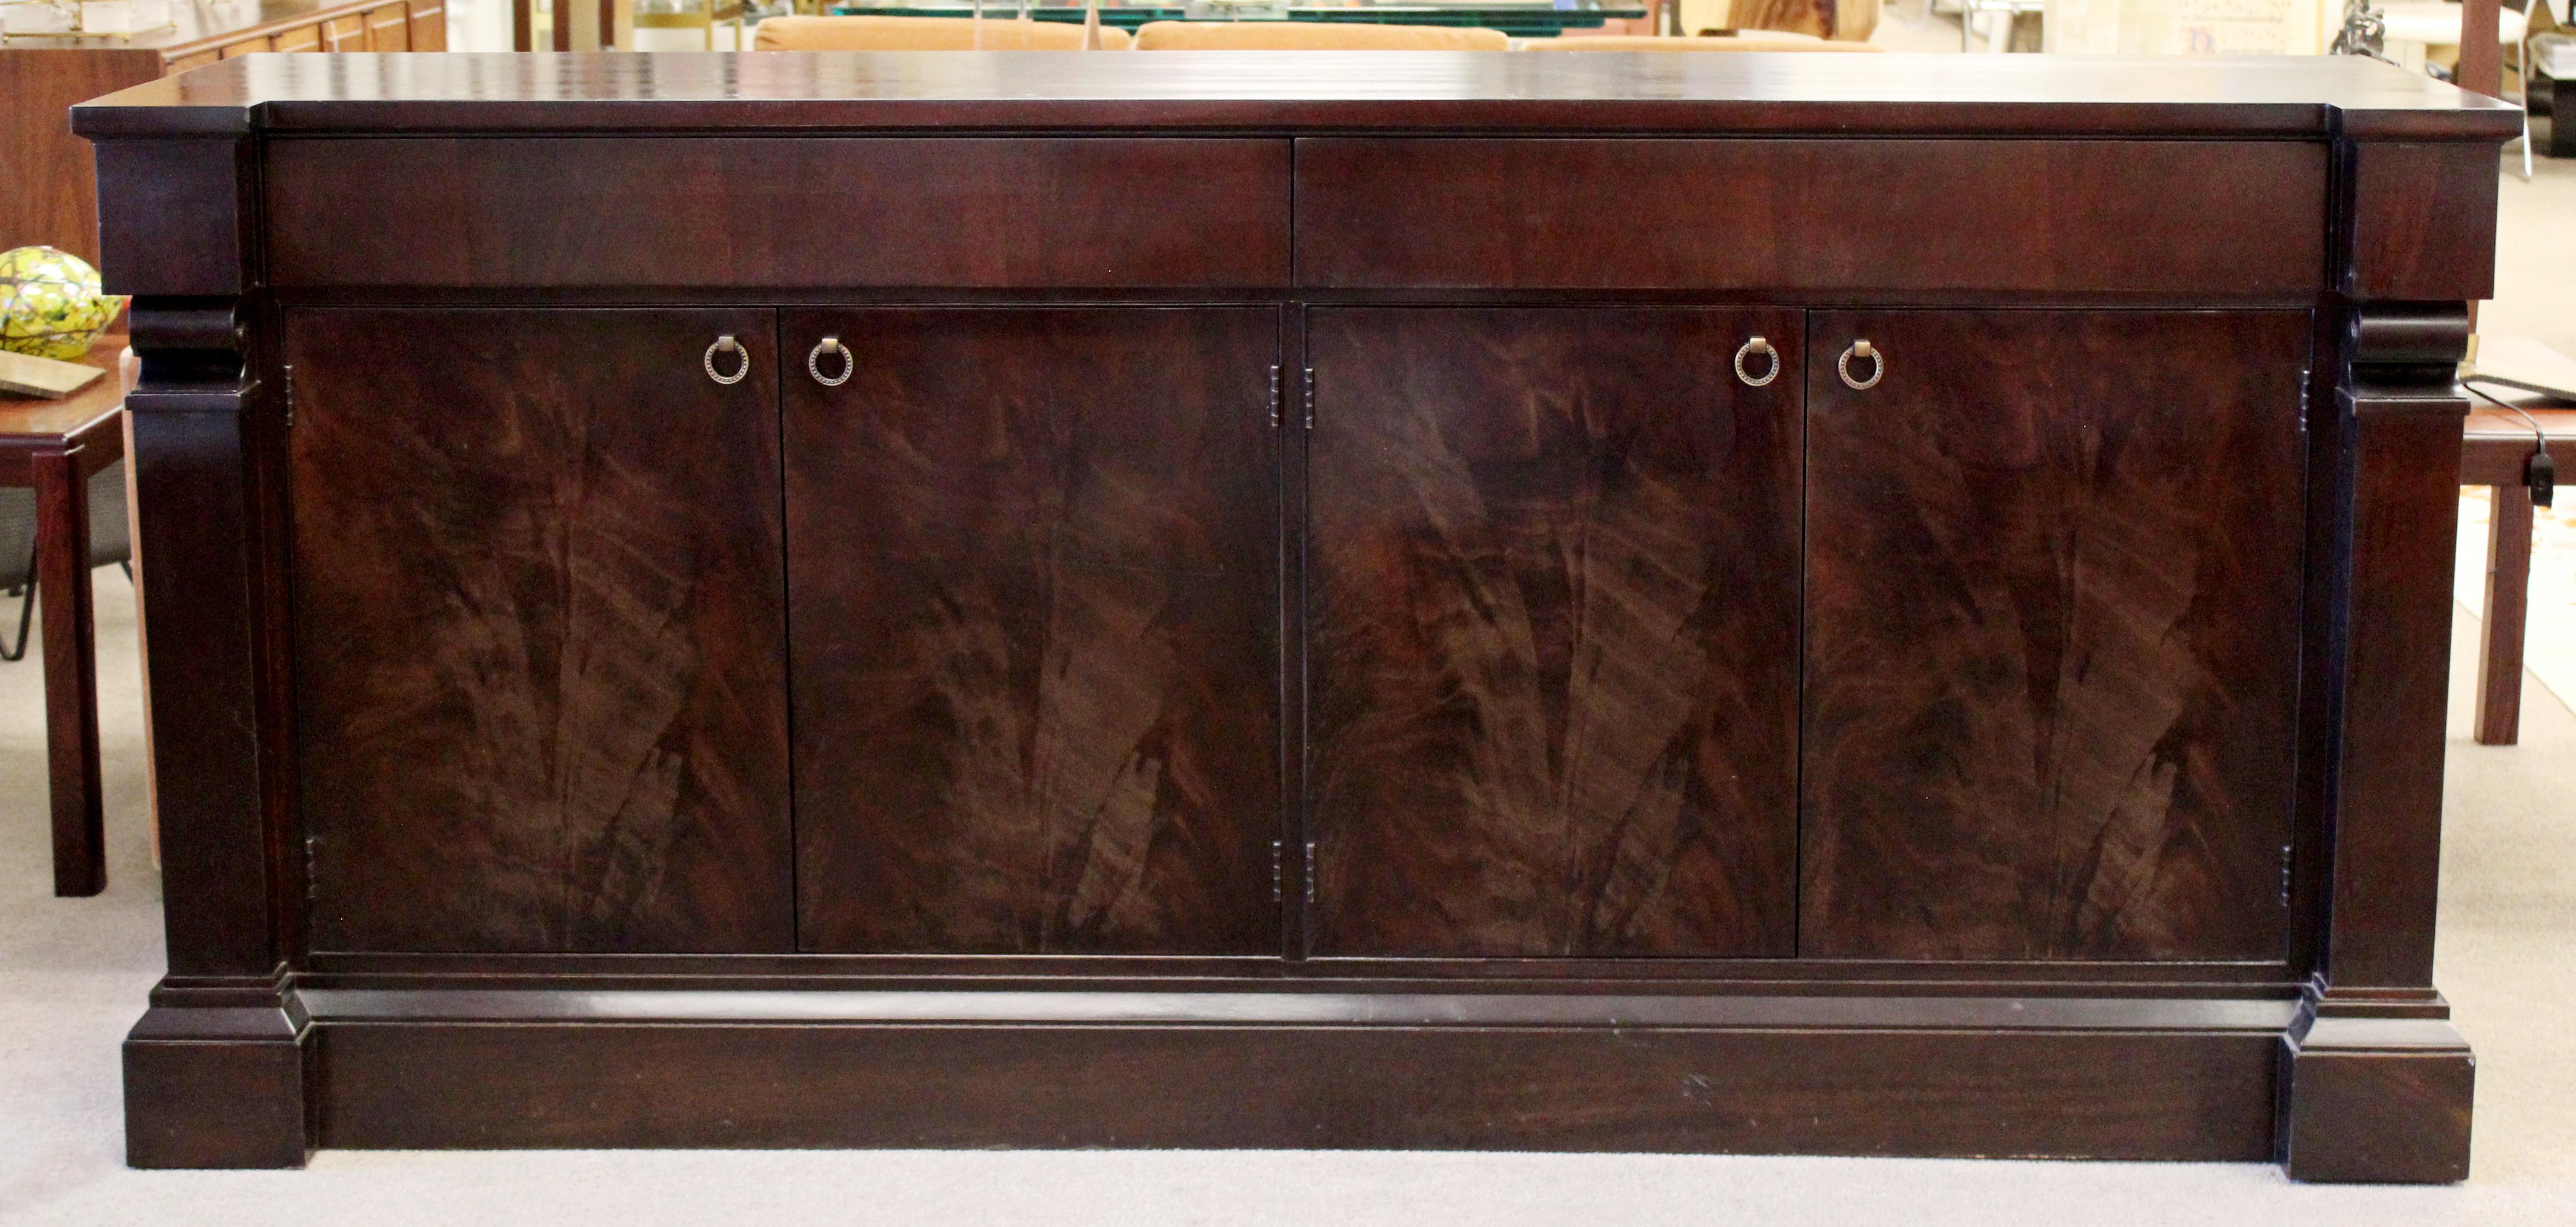 For your consideration is a captivating and large, carved mahogany, transitional style credenza, by Baker Furniture, circa 1980s. In excellent vintage condition. The dimensions are 79.5